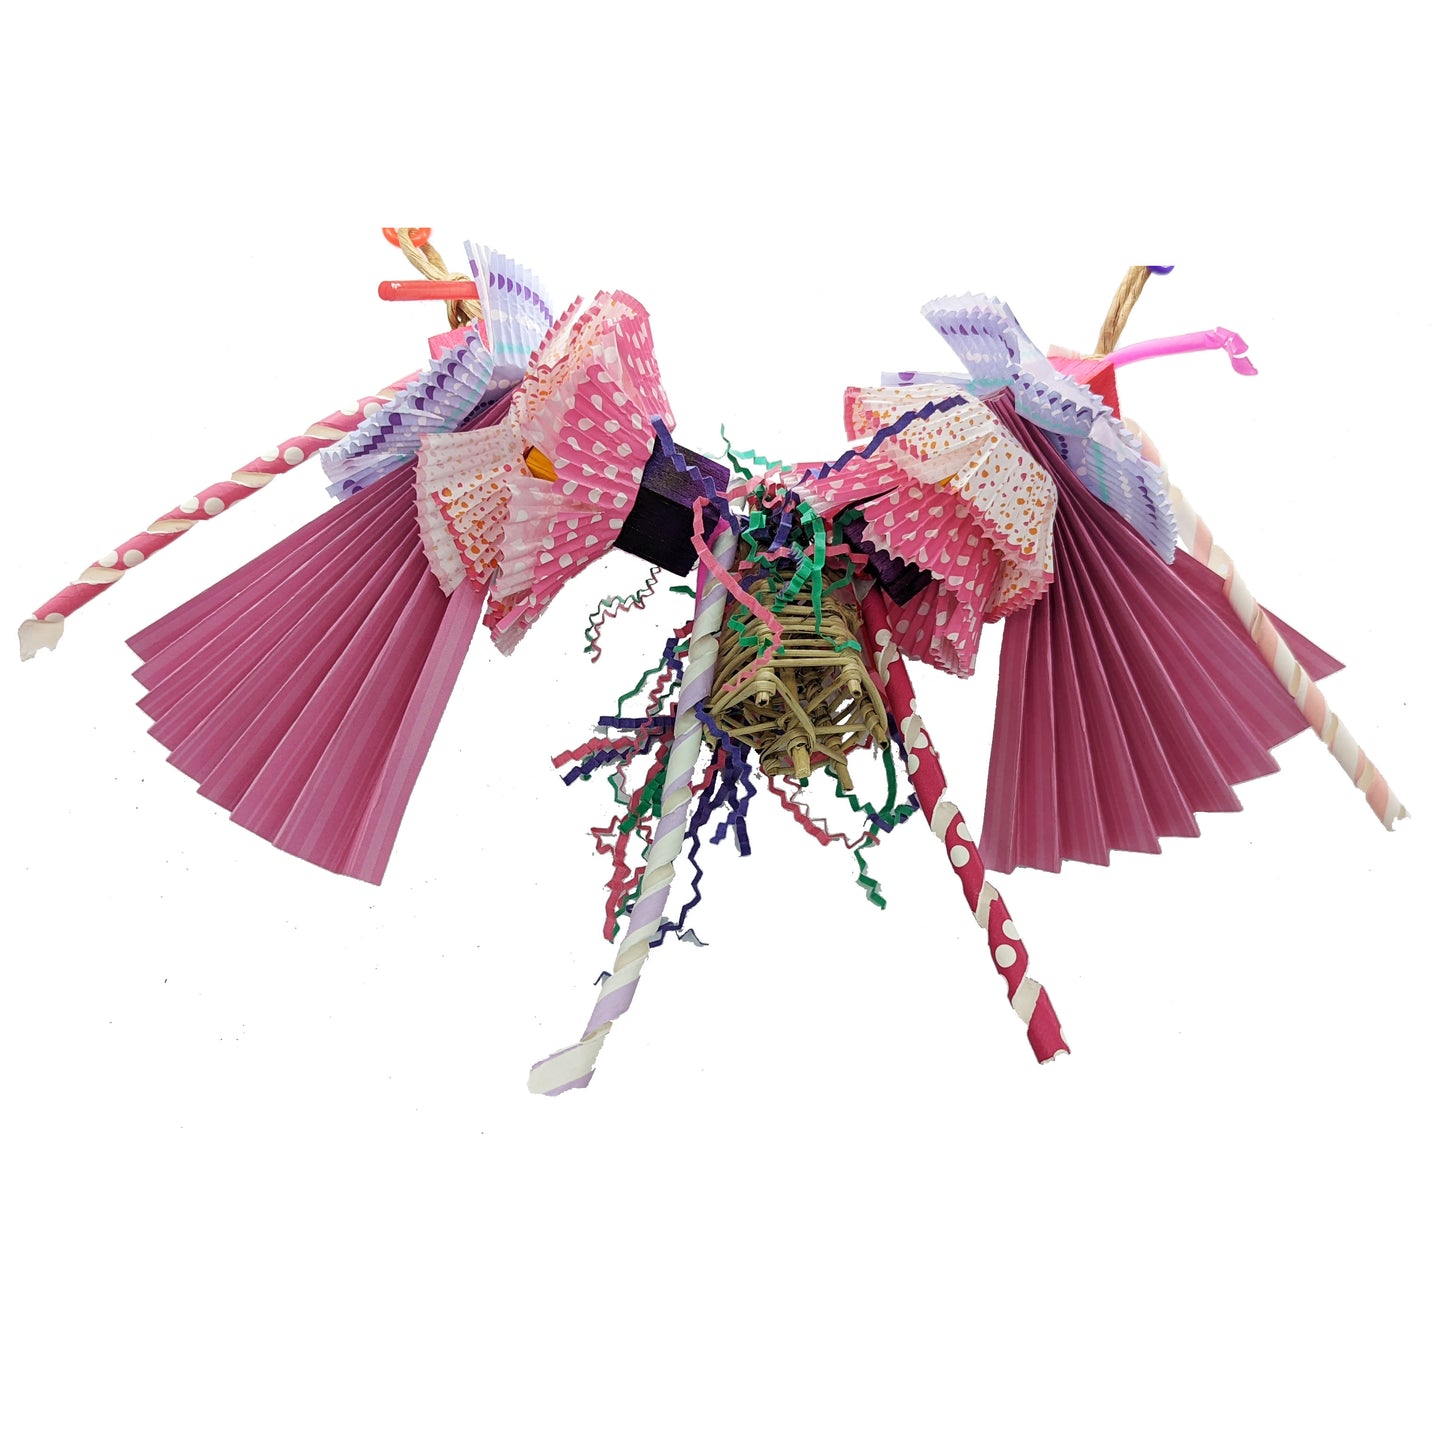 A garland style toy for parrots with cupcake liners, paper straws, and shredded paper, in pink, purple, and yellow colors with various patterns. Includes balsa blocks, a vine party hat, and strung on paper rope. Pine and purple coloration